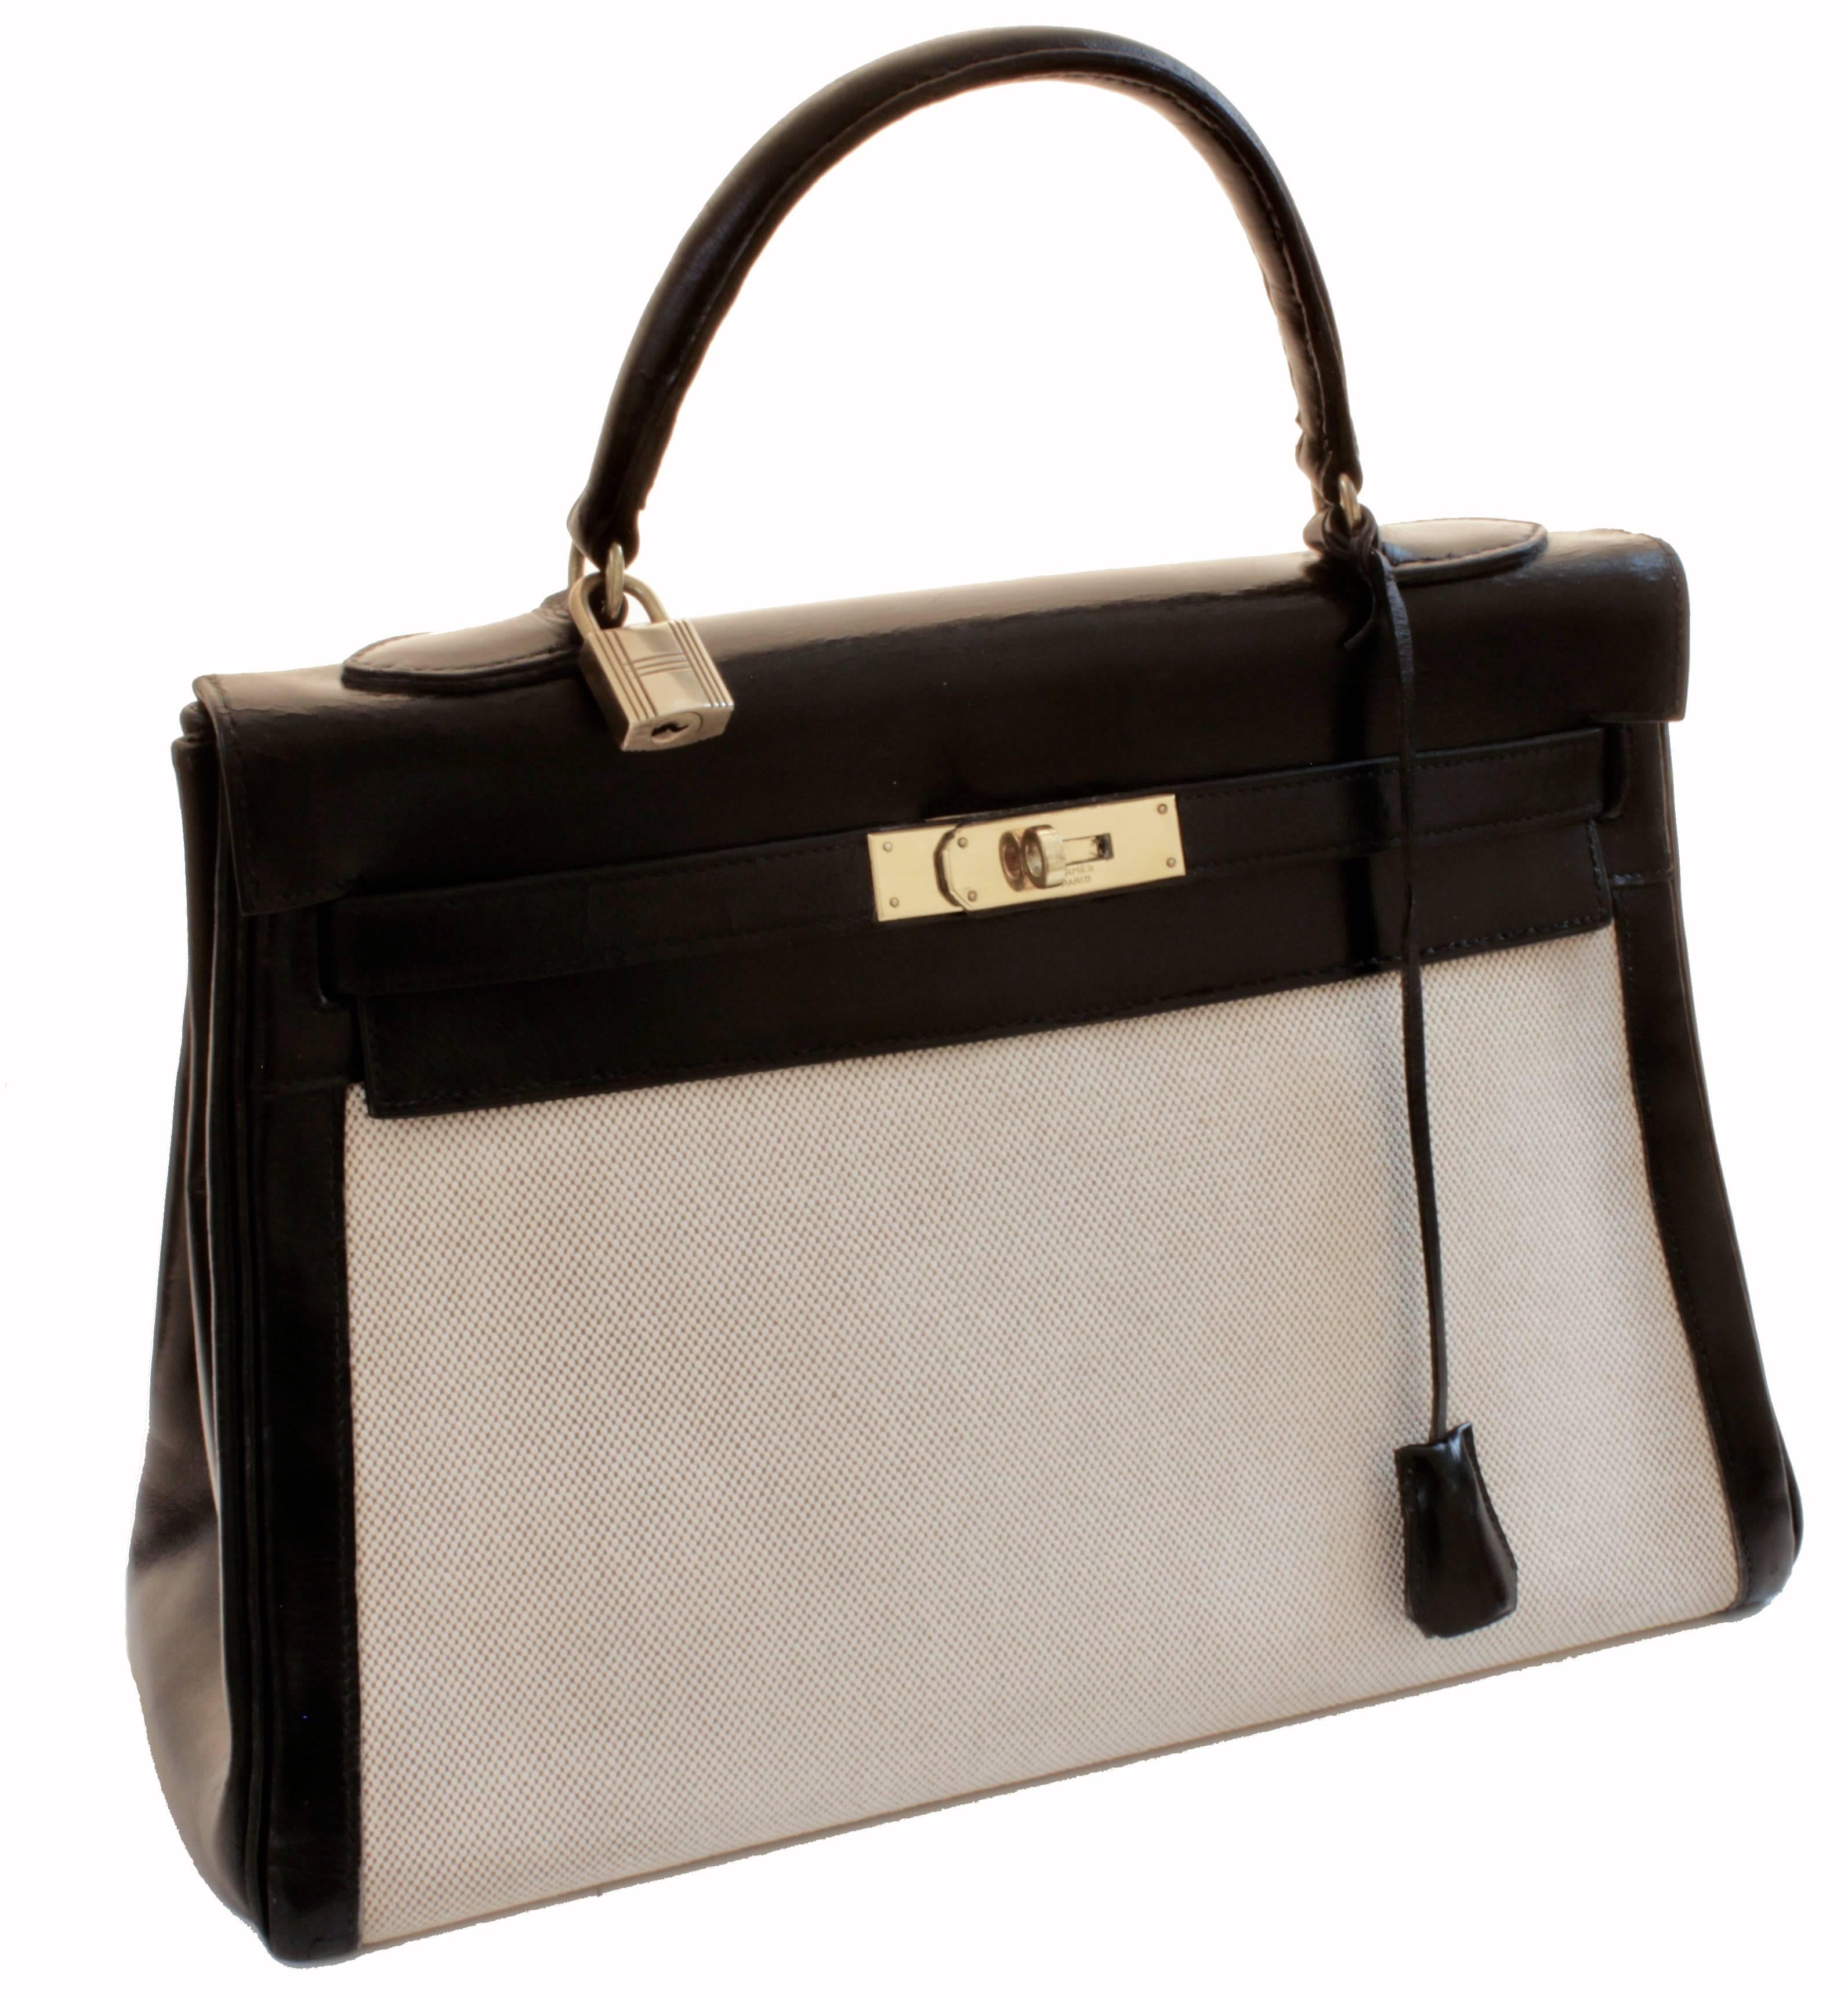 This fabulous handbag was made by Hermes in 1949.  Originally coined the Sac a Depeches, this bag is now known as The Kelly Bag and is made from black Gulliver Leather and canvas.  With it's retourne or outer stitching, it's lined in black goatskin